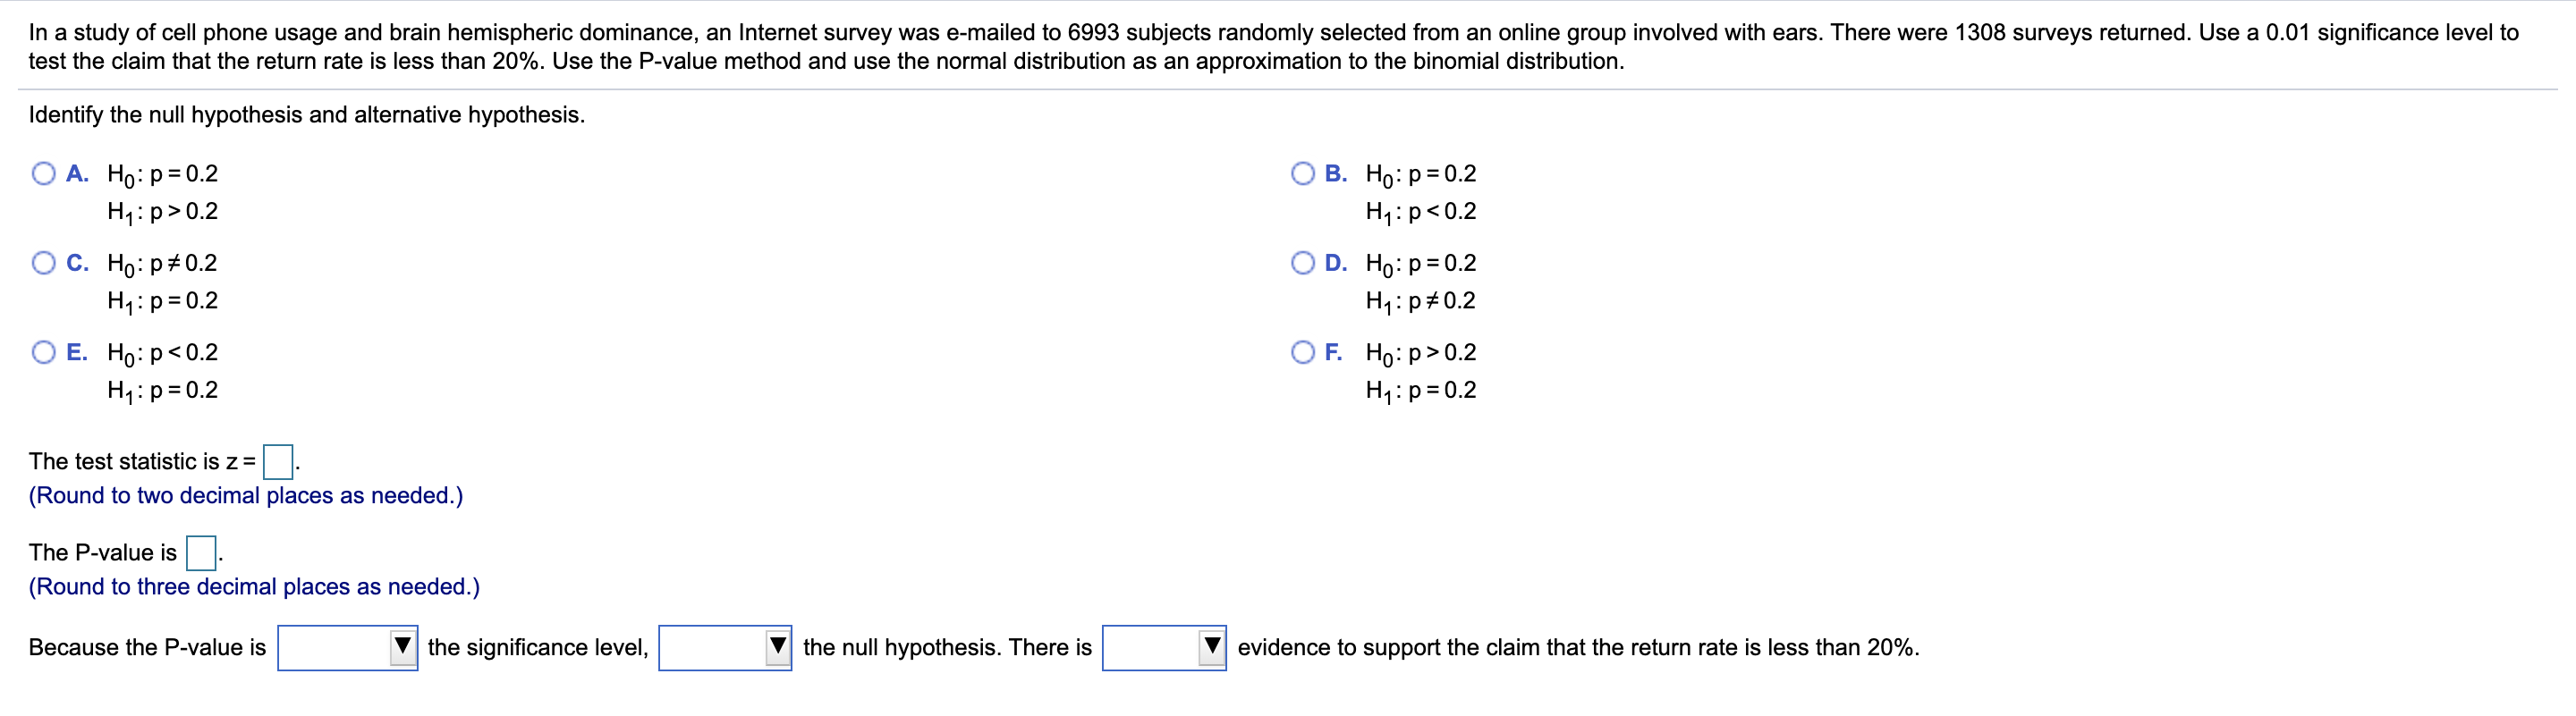 In a study of cell phone usage and brain hemispheric dominance, an Internet survey was e-mailed to 6993 subjects randomly selected from an online group involved with ears. There were 1308 surveys returned. Use a 0.01 significance level to
test the claim that the return rate is less than 20%. Use the P-value method and use the normal distribution as an approximation to the binomial distribution.
Identify the null hypothesis and alternative hypothesis.
В. Но: р3D0.2
А. Но: р3D0.2
H1:p>0.2
H1:p<0.2
С. Но: р#0.2
O D. Ho: p= 0.2
H4:p=0.2
H1: p#0.2
O F. Но: р> 0.2
Е. Но: р<0.2
H4:p=0.2
H4:p=0.2
The test statistic is z =
(Round to two decimal places as needed.)
The P-value is
(Round to three decimal places as needed.)
Because the P-value is
the significance level,
the null hypothesis. There is
evidence to support the claim that the return rate is less than 20%.
